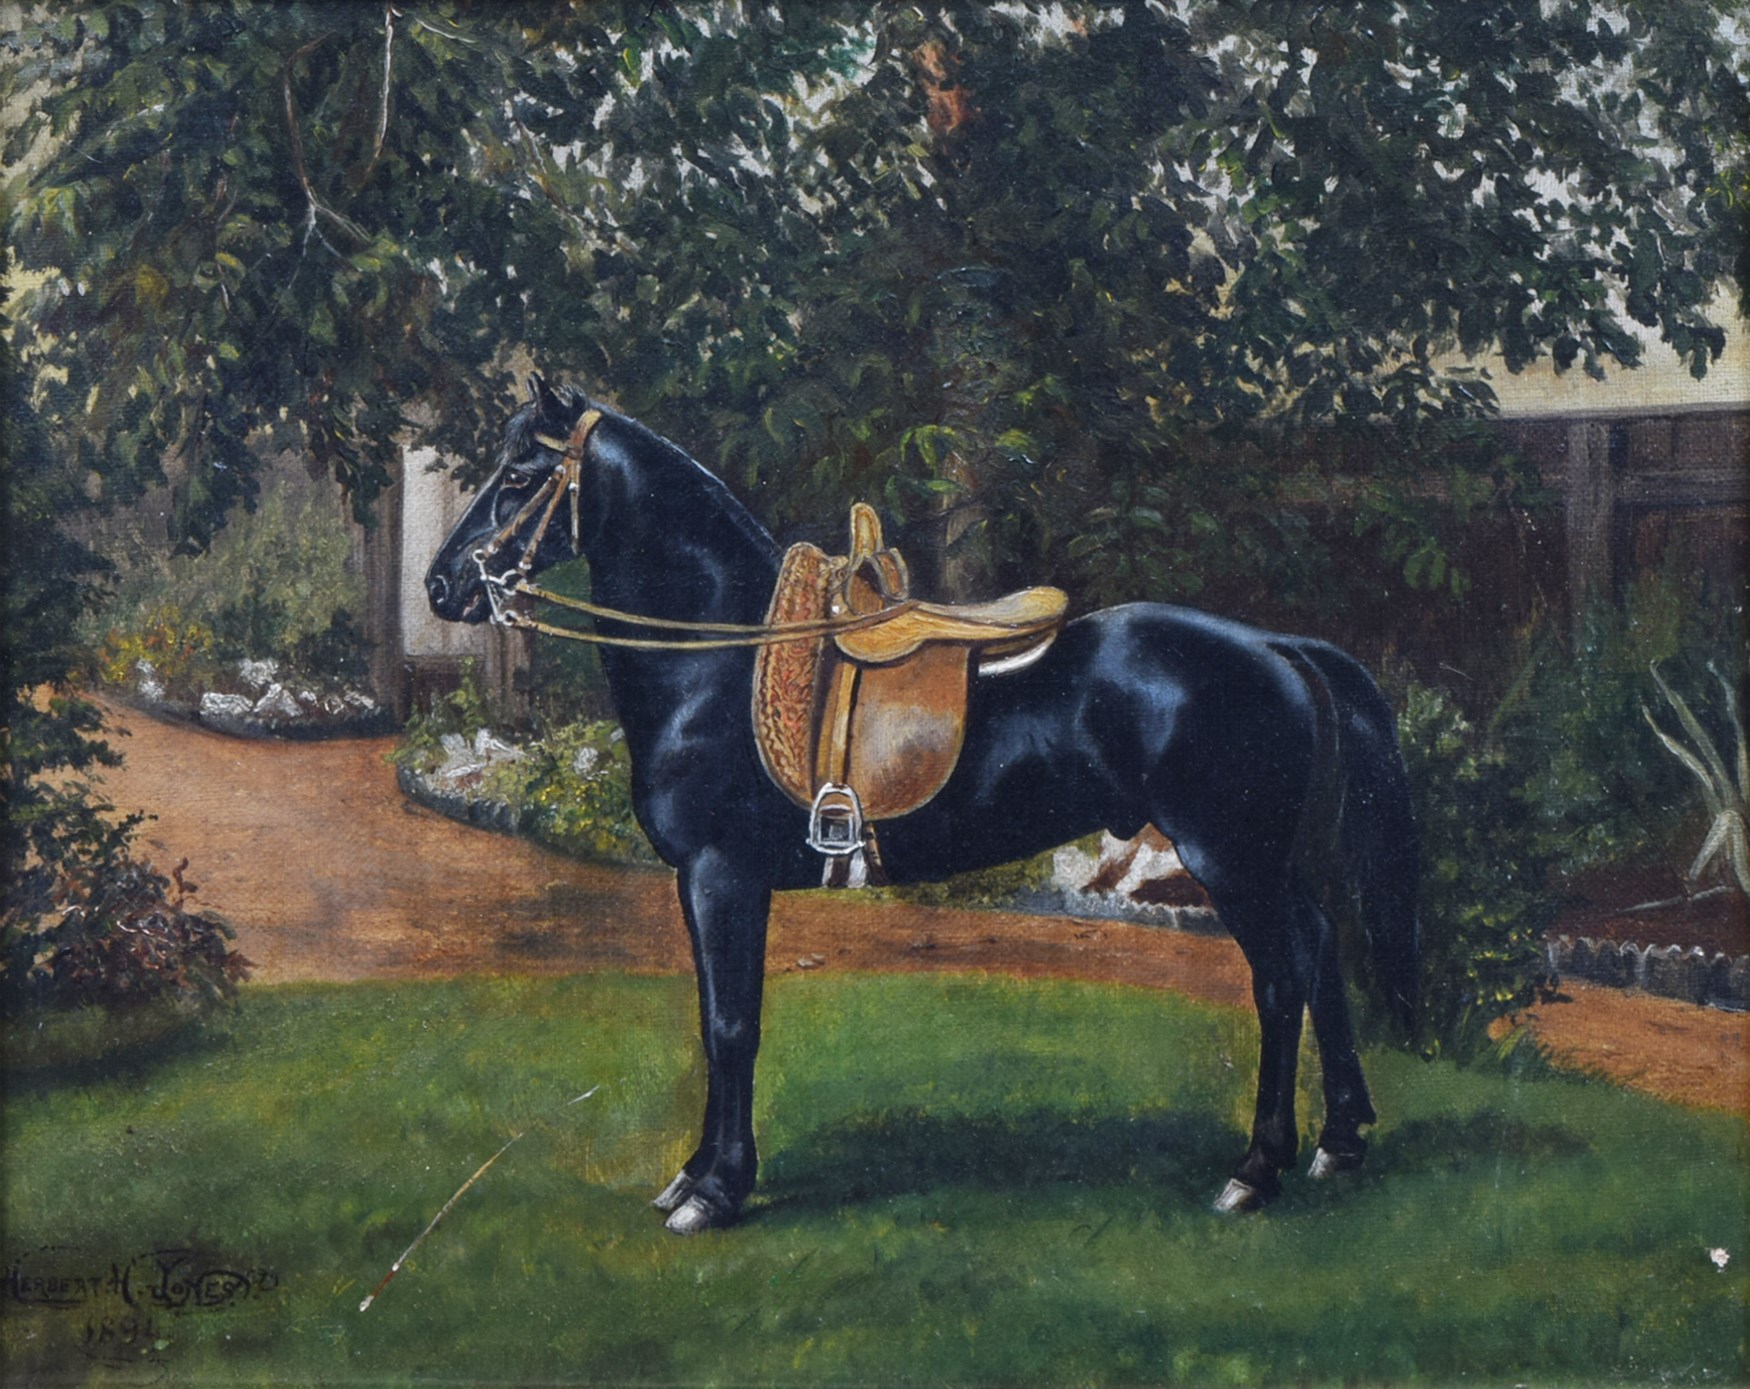 Herbert St. John Jones (1872-1939), Portrait of a pony, signed and dated 1894, oil on canvas, 23.5 x